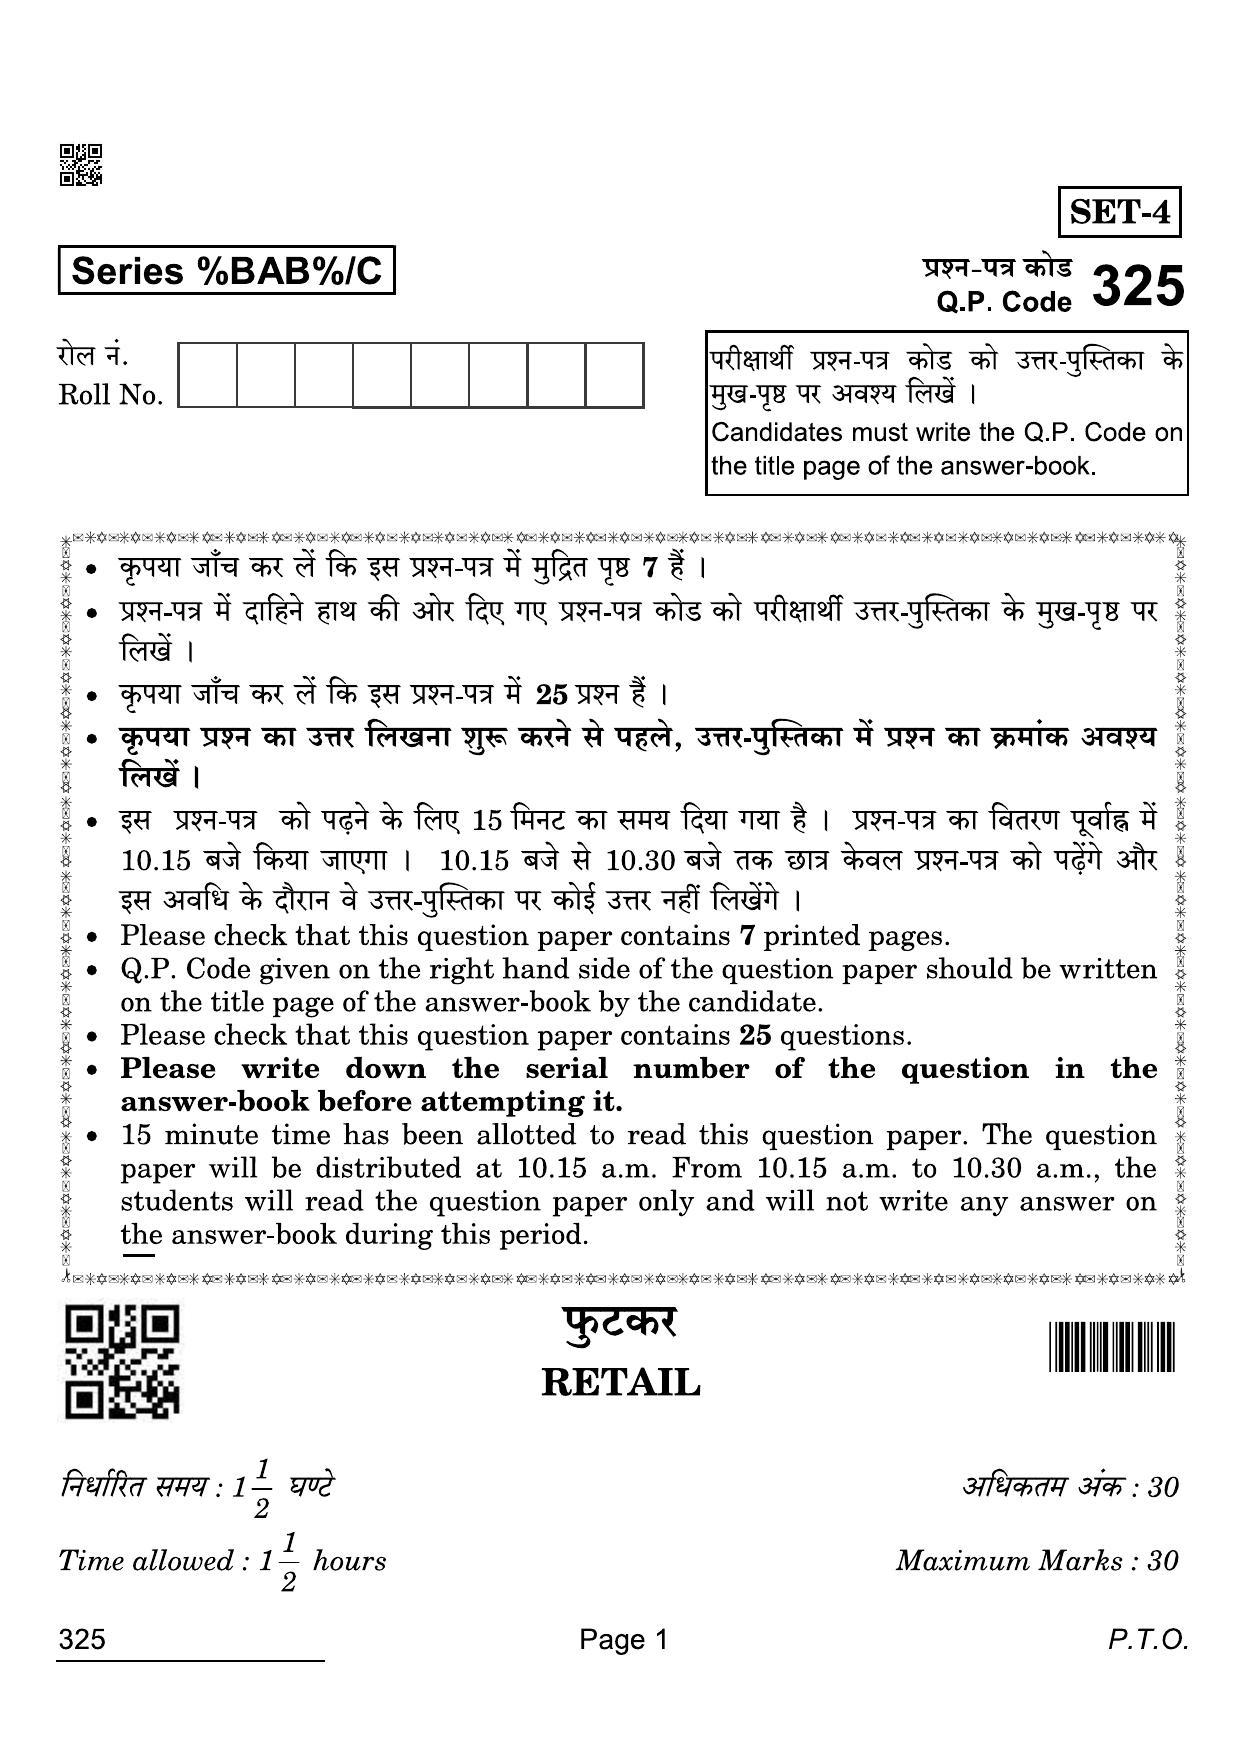 CBSE Class 12 325 Retail 2022 Compartment Question Paper - Page 1